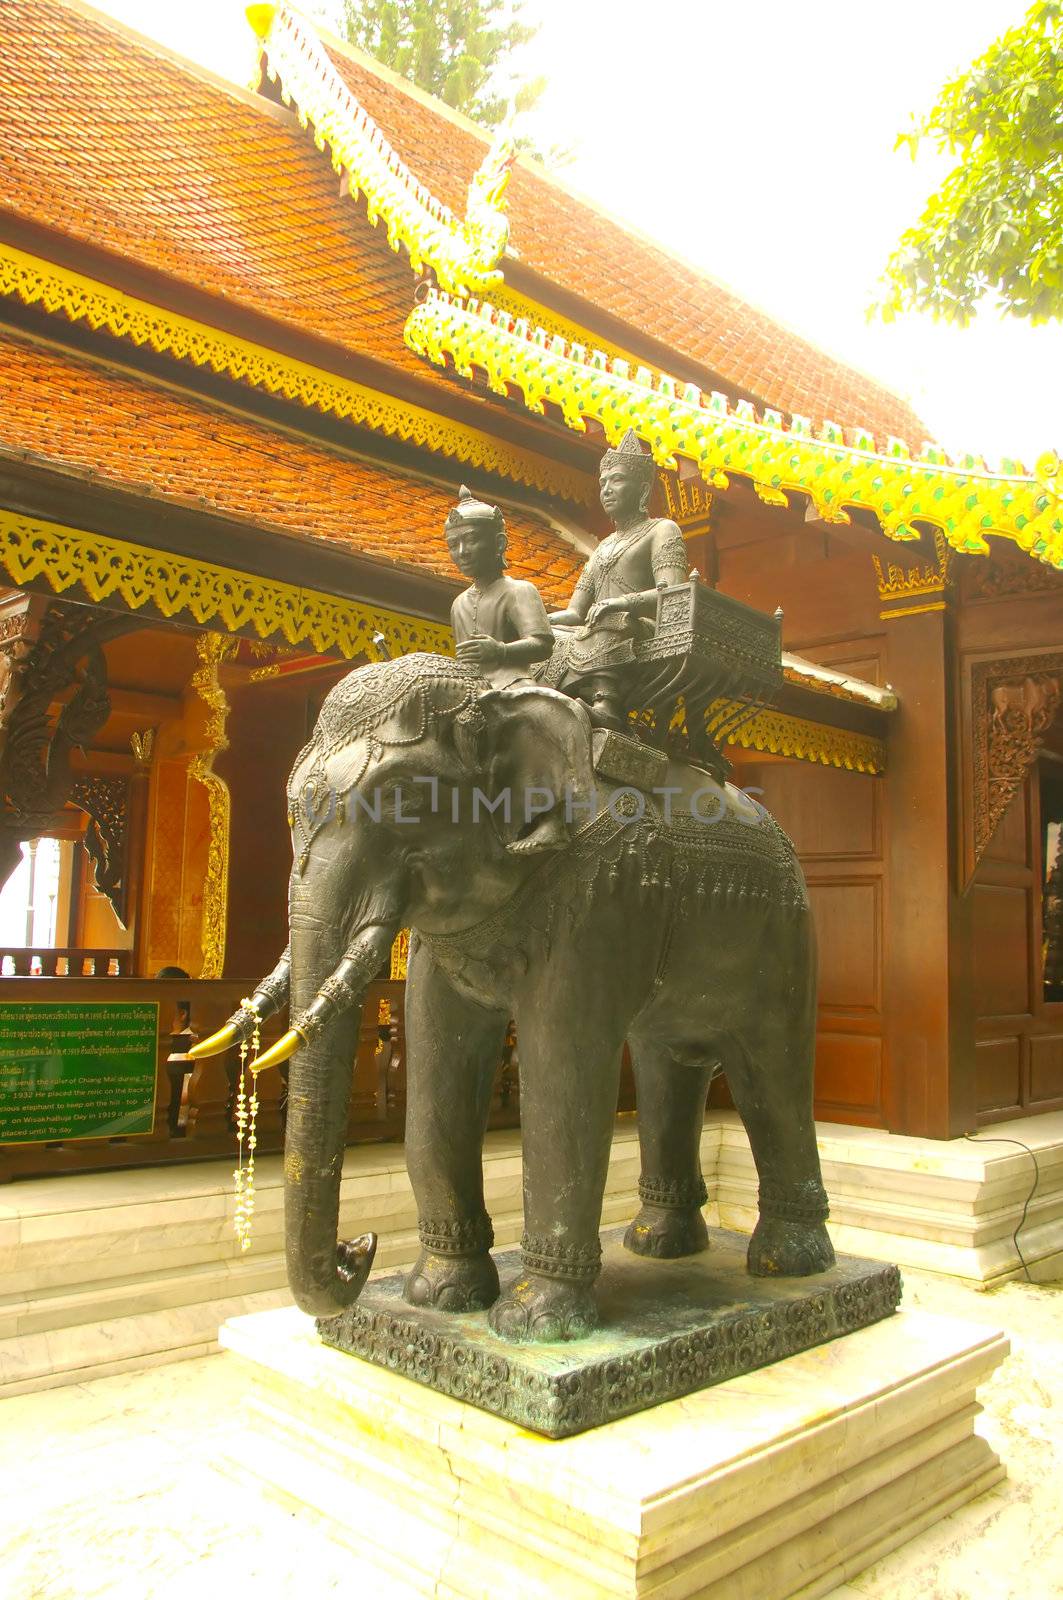 A huge bronze elephant Phrathat Wat Doi Suthep. Statue recalling the legend of the origin of the creation of the temple. The monk Sumanathera bringing a relic of the Buddha to the King. The white elephant in charge of the relic went up the hill and died there.